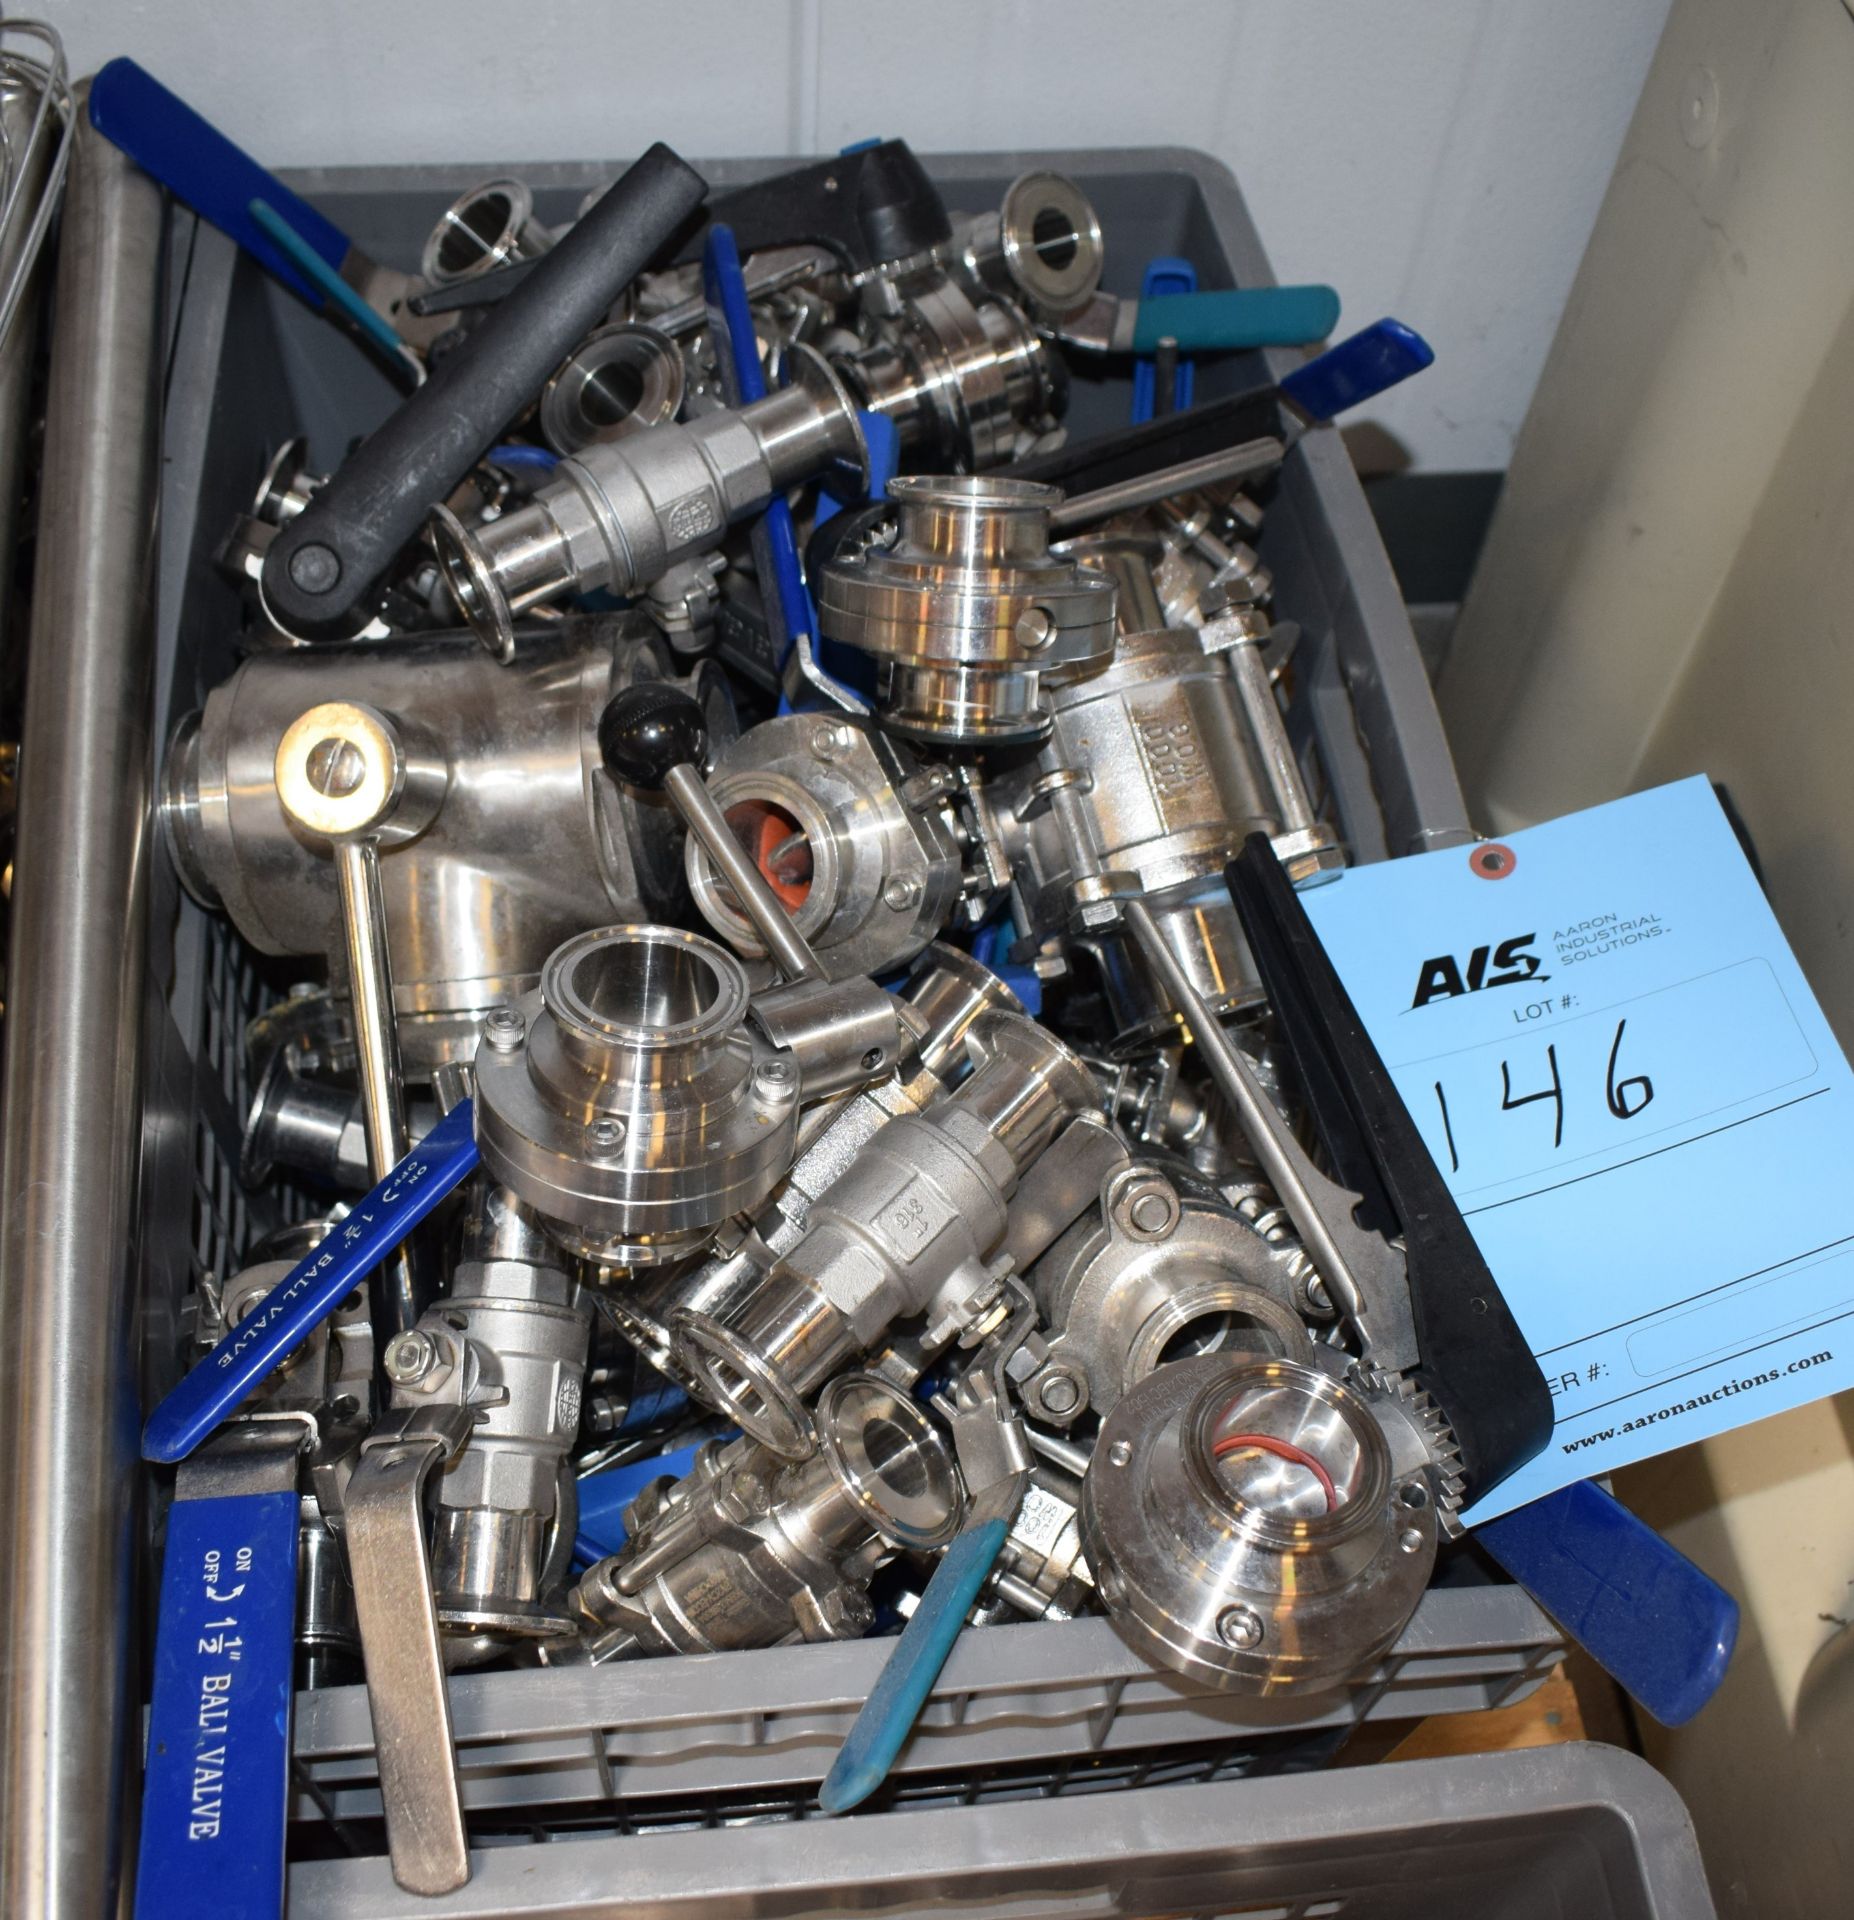 Lot Of Stainless steel 1-1/2", 2" valves. - Image 2 of 2